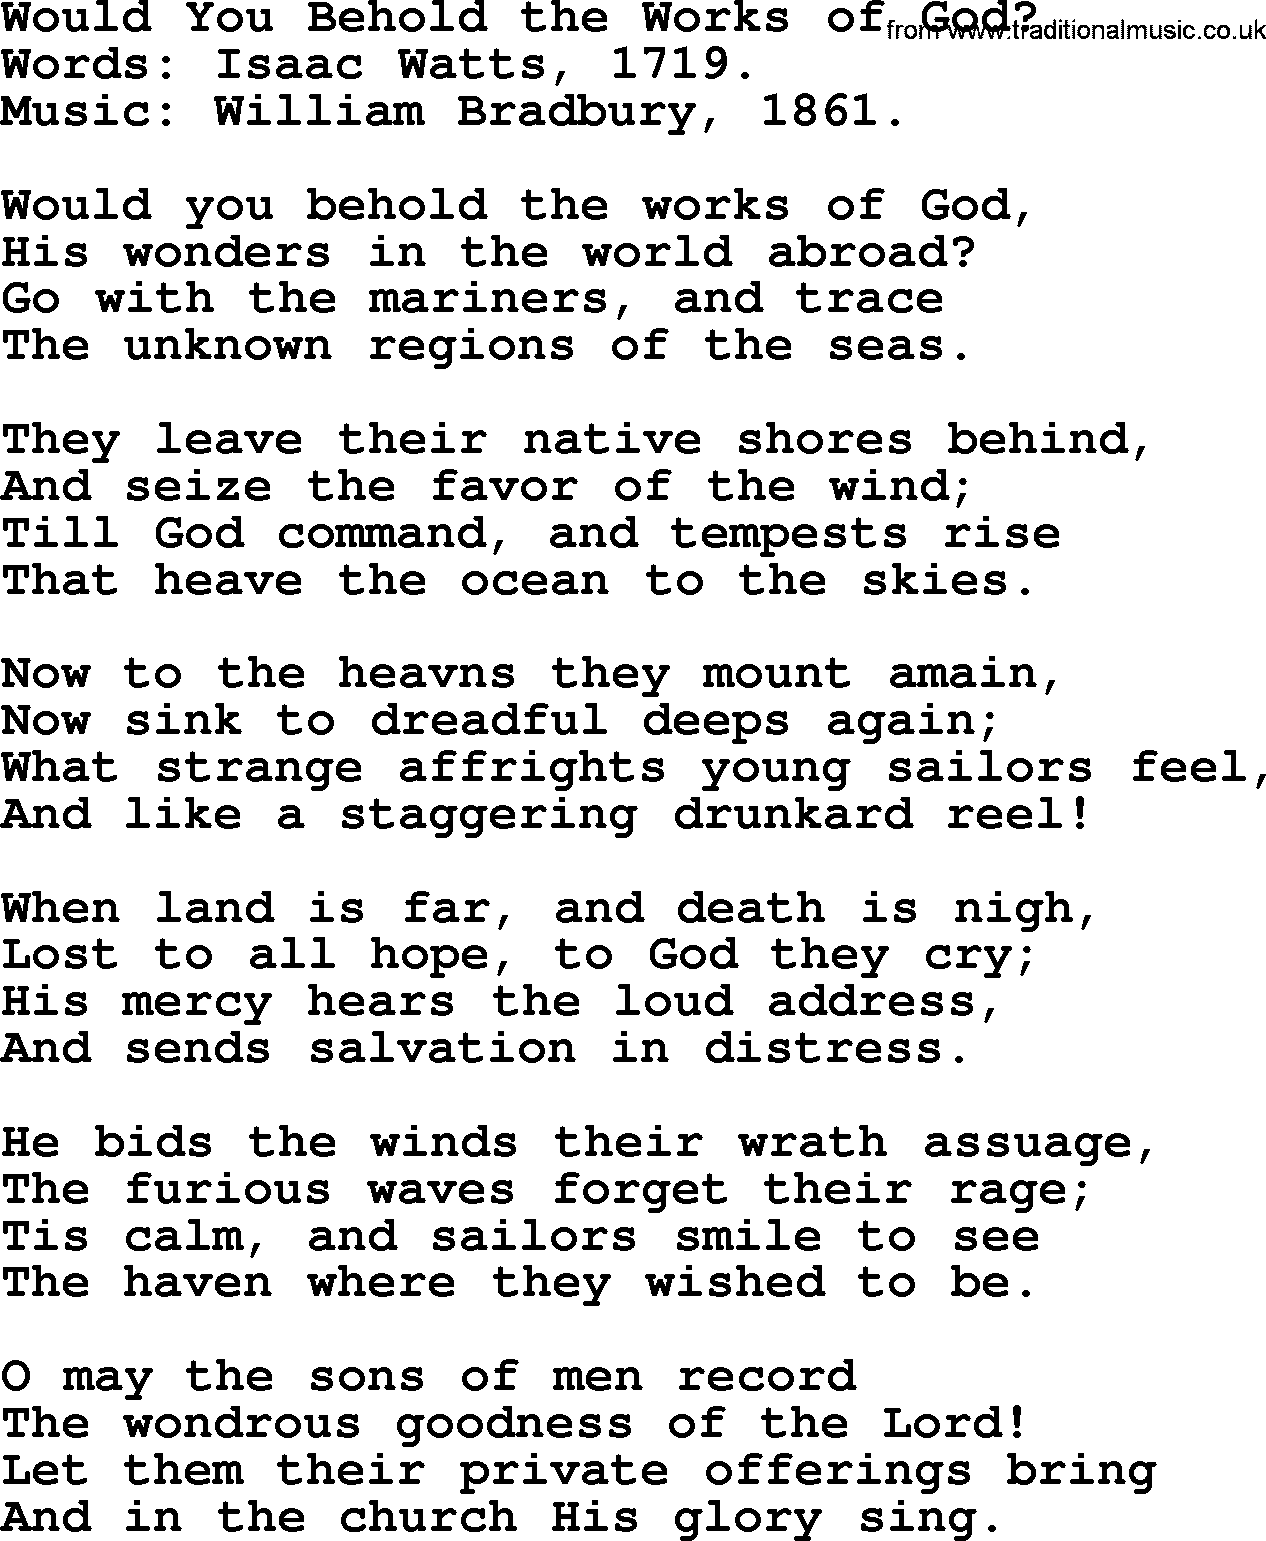 Isaac Watts Christian hymn: Would You Behold the Works of God_- lyricss